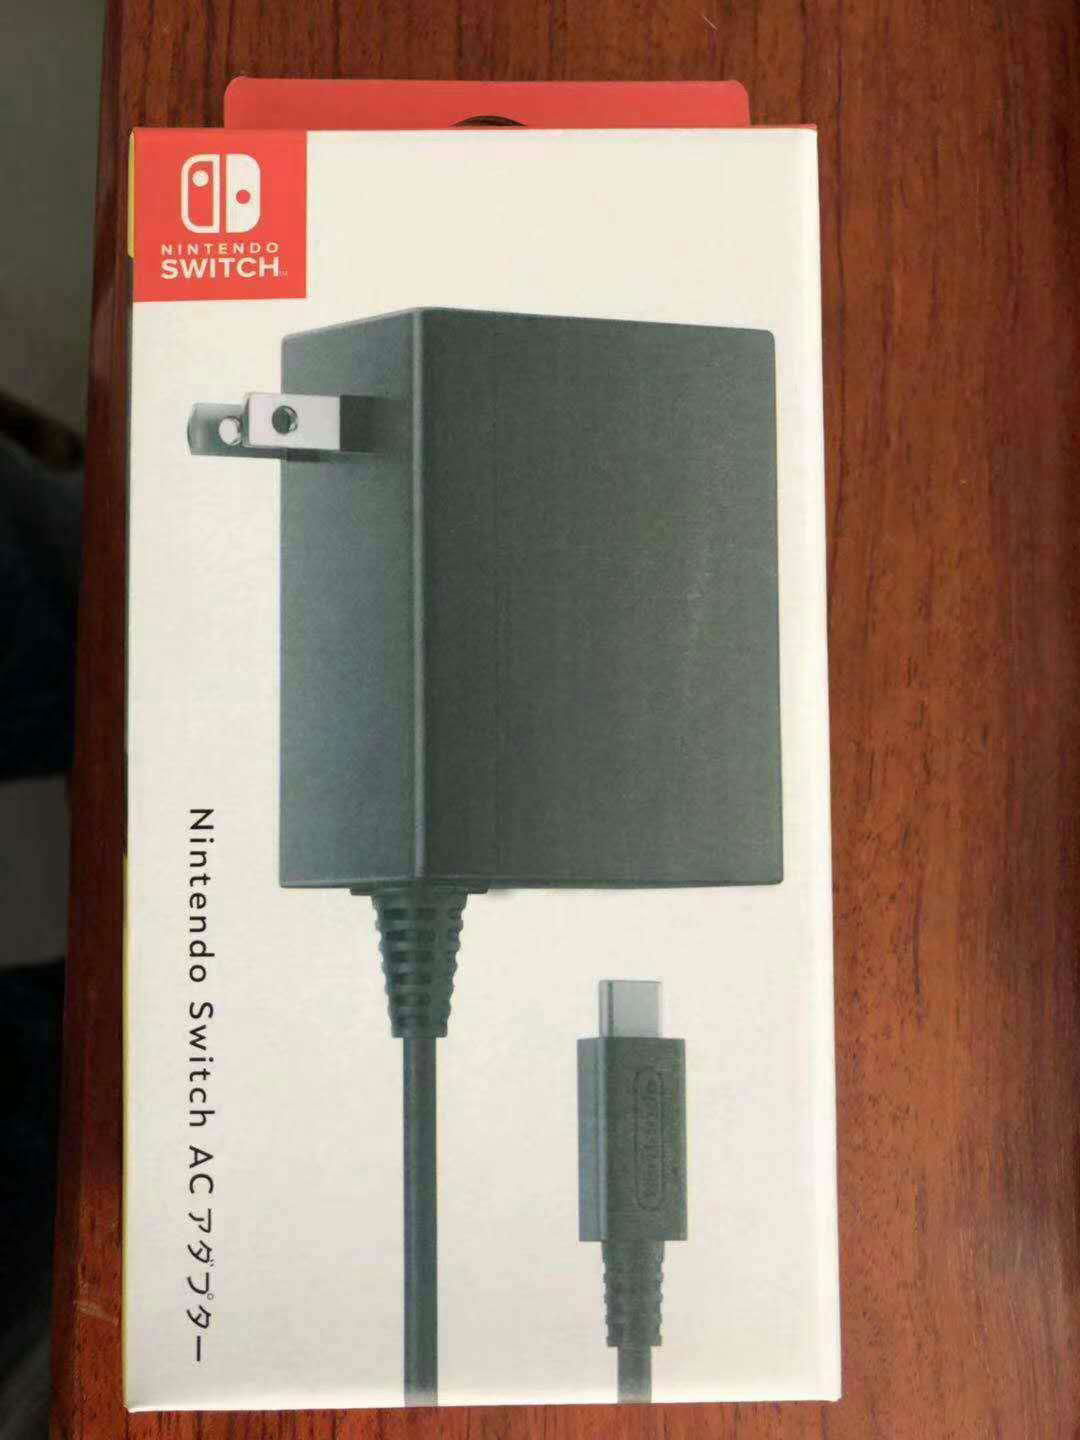 Hot Sale Nintendo Switch AC Adapter Quick Charger for Game Accessories